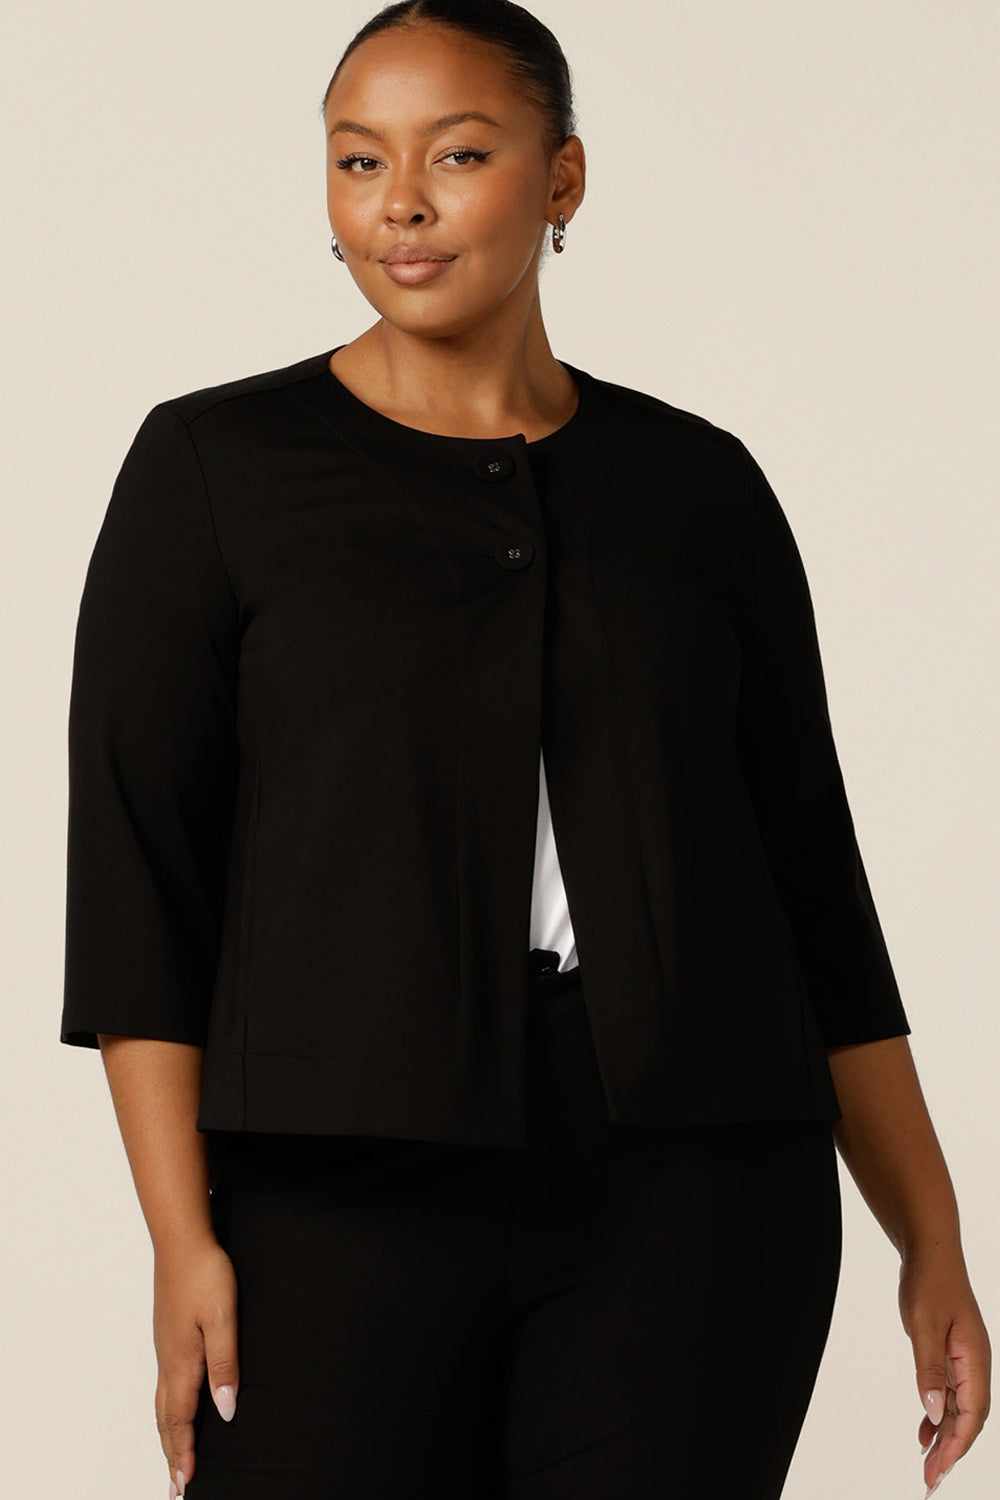 A plus size, size 18 woman wears a black swing jacket for alternative corporate wear. Featuring round collarless neckline with 2-button fastenings, 3/4 sleeves and swing back, this black jacket has a sophisticated corporate elegance with made-in-Australia quality.